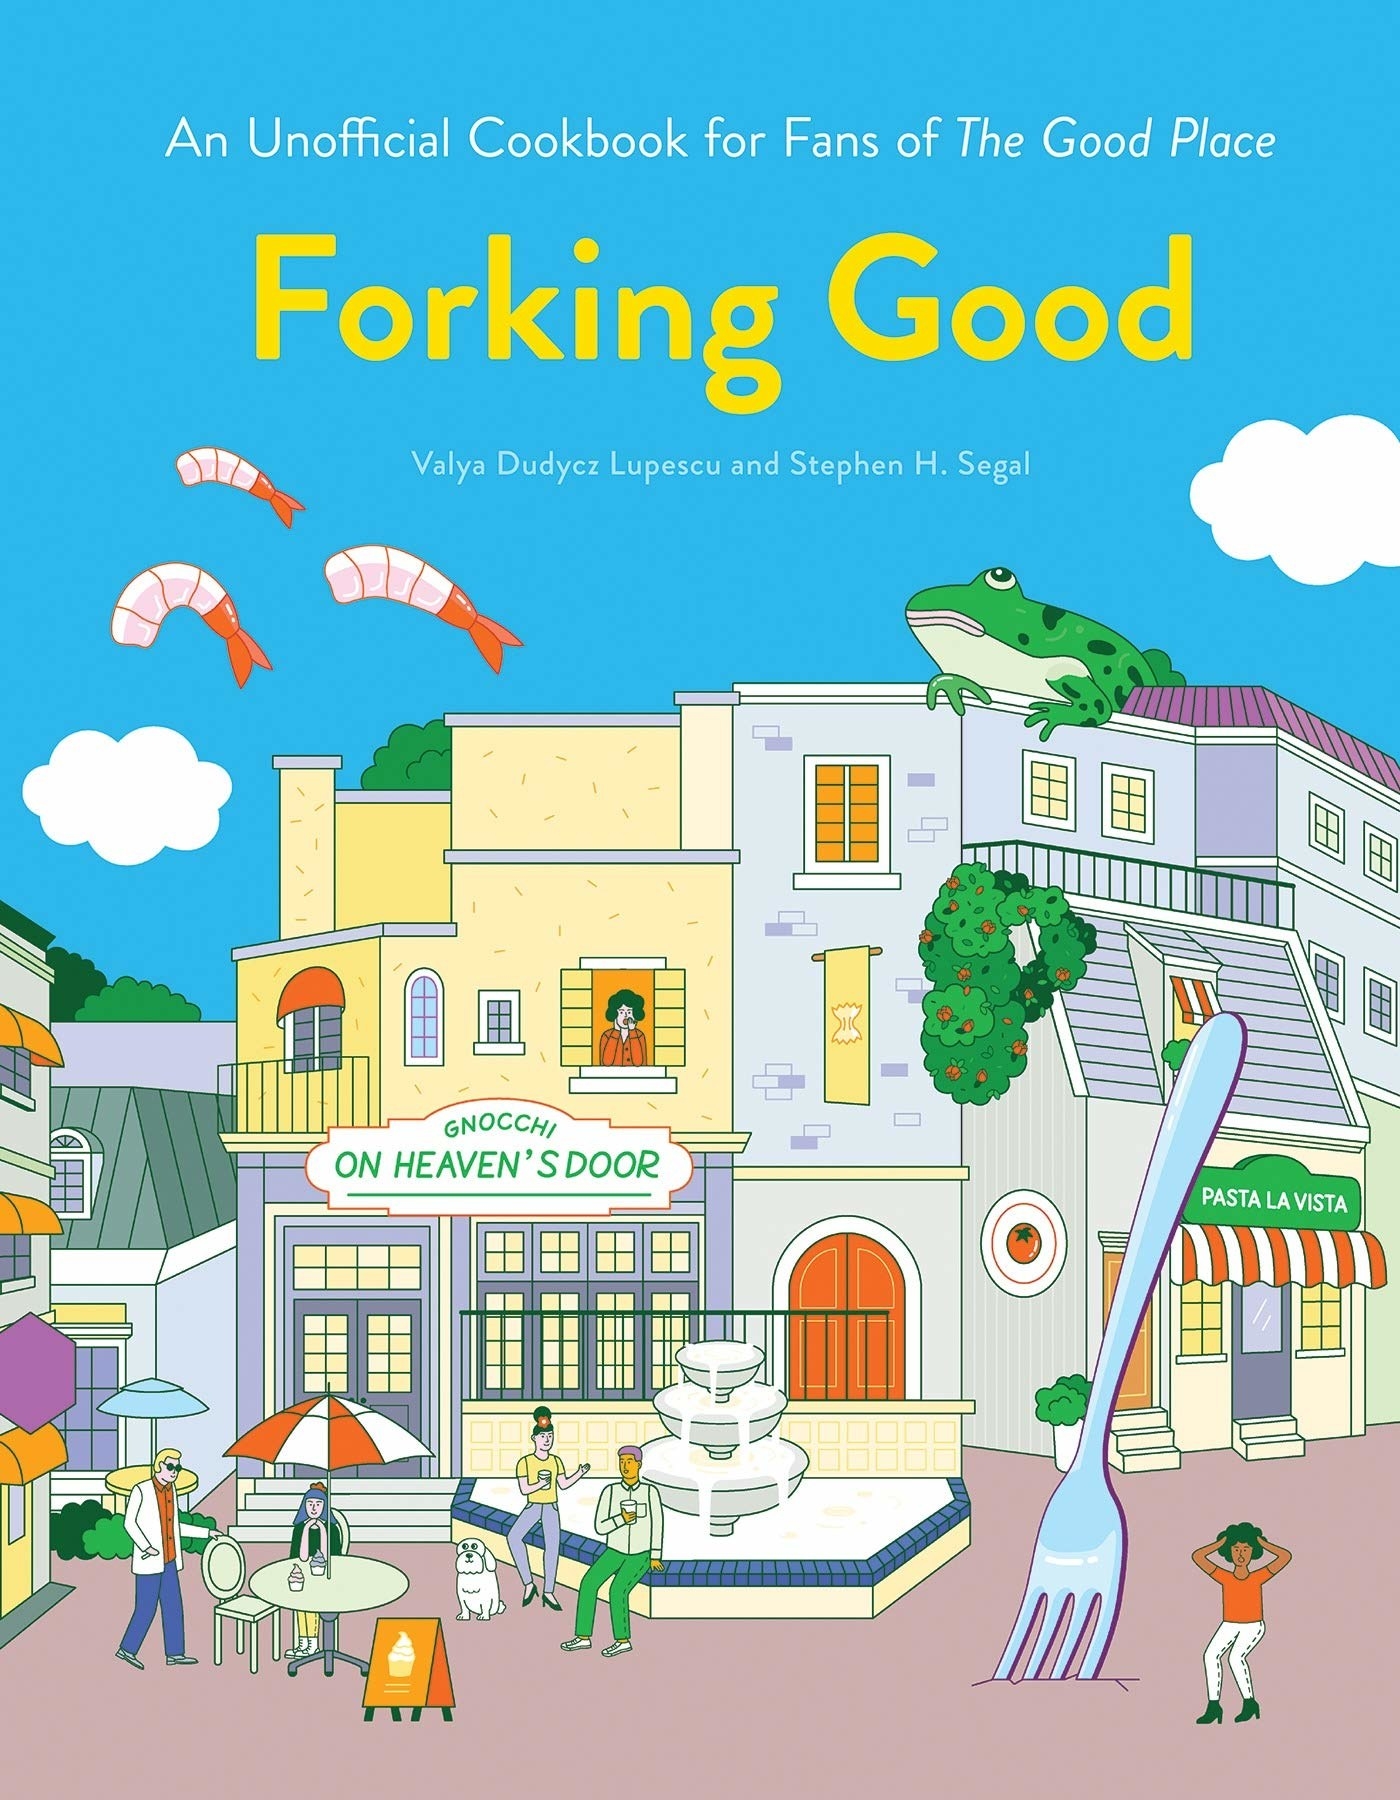 The book cover of a Good Place cookbook which is a cartoon-like drawing of the town square